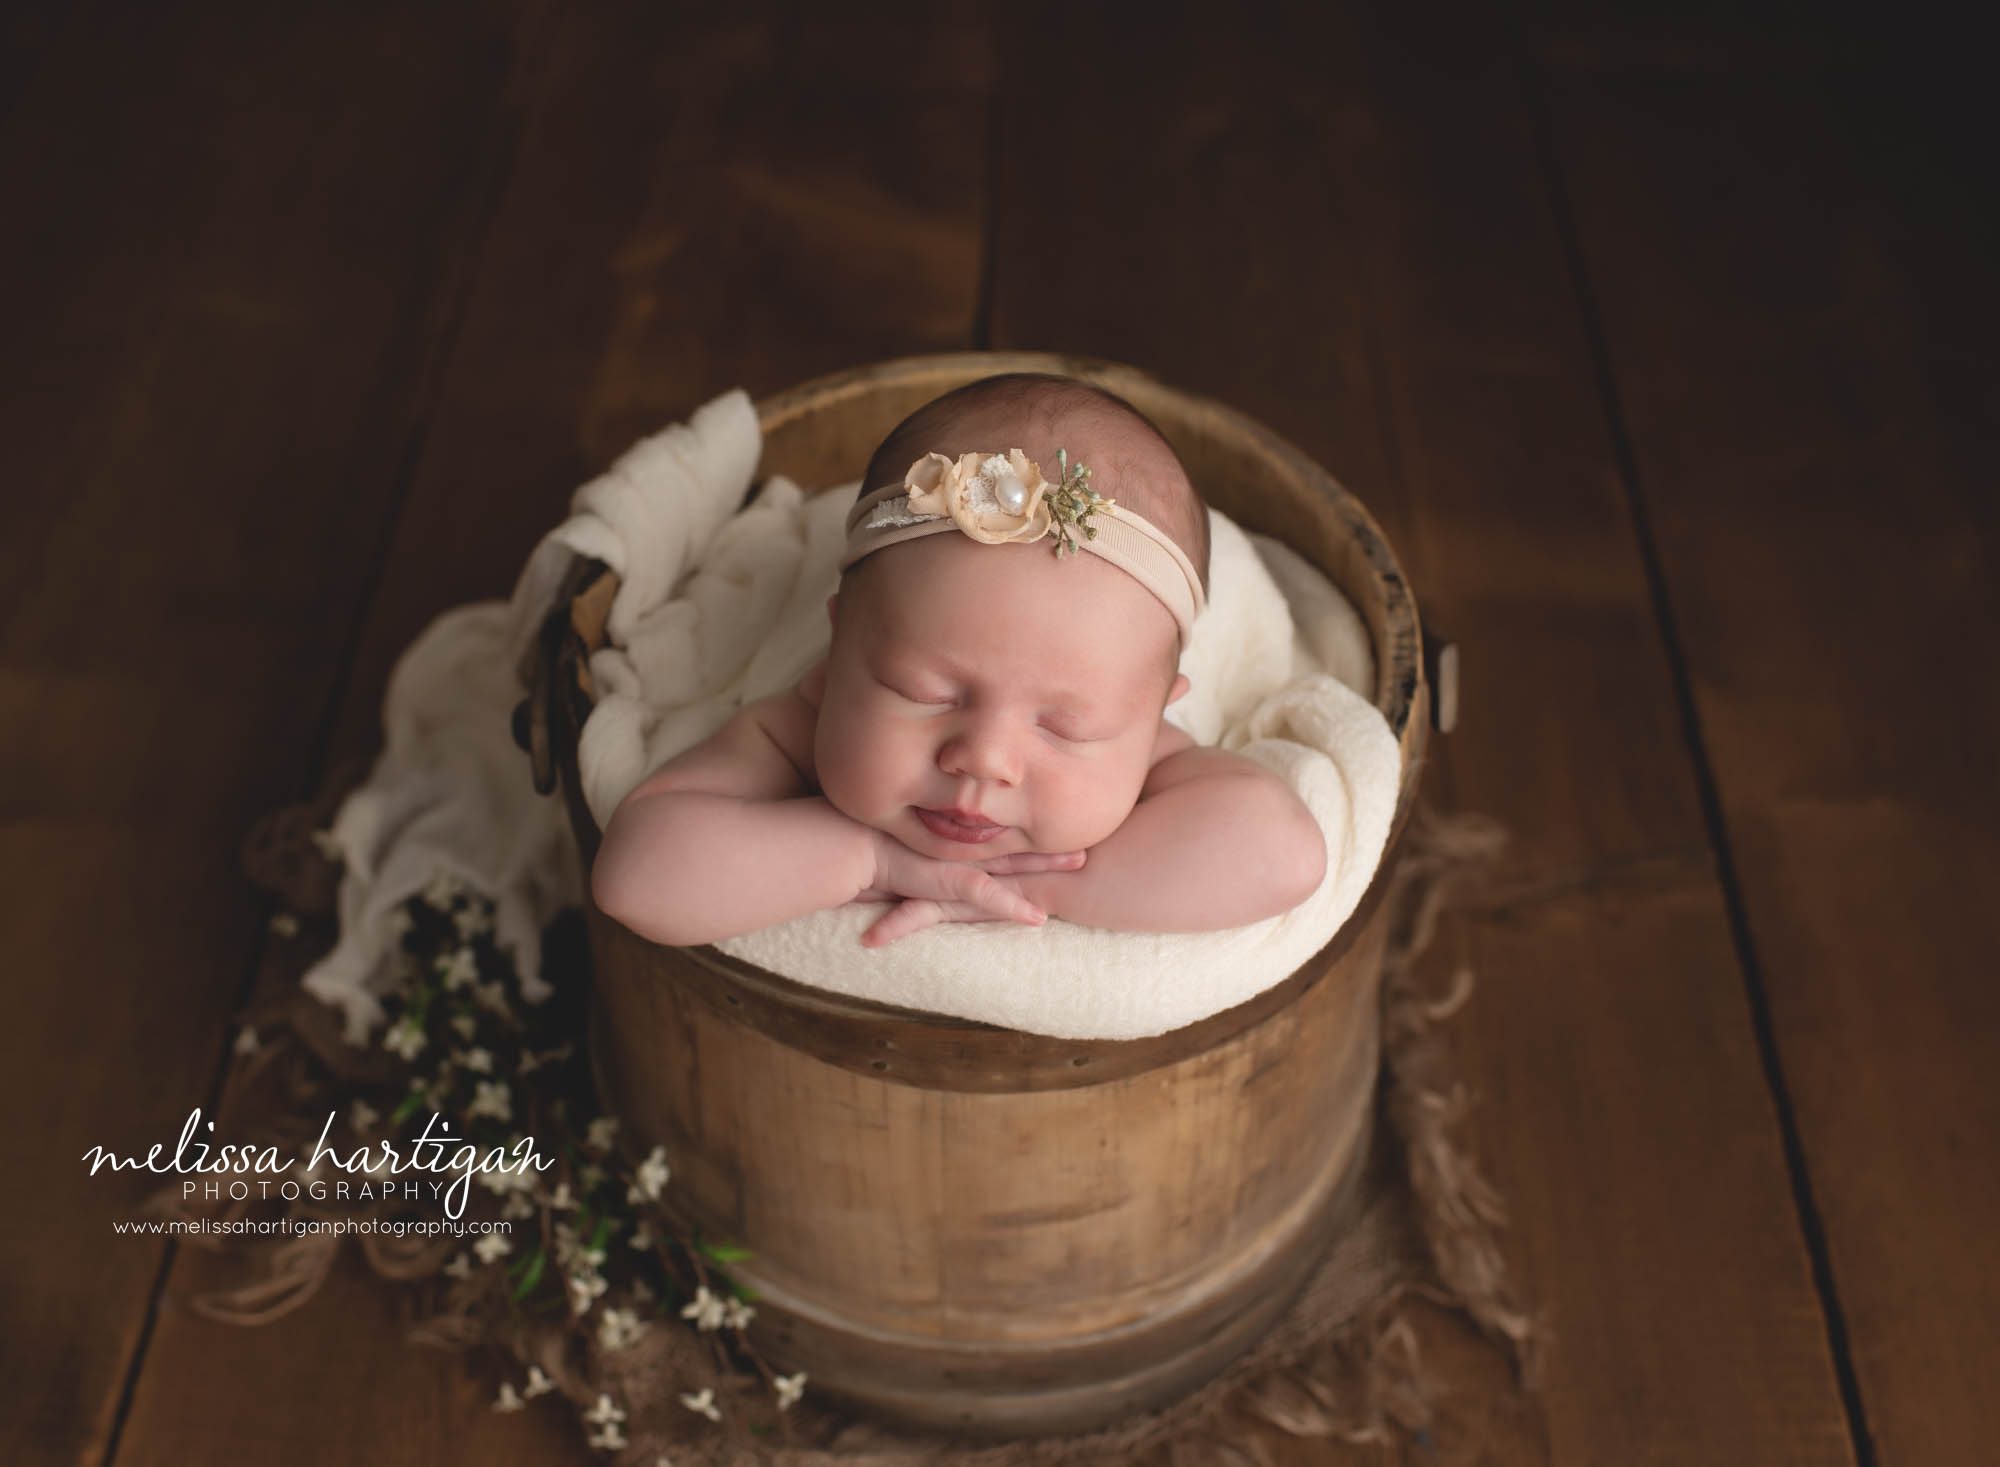 baby girl posed in rustic wooden bucket with head on hands